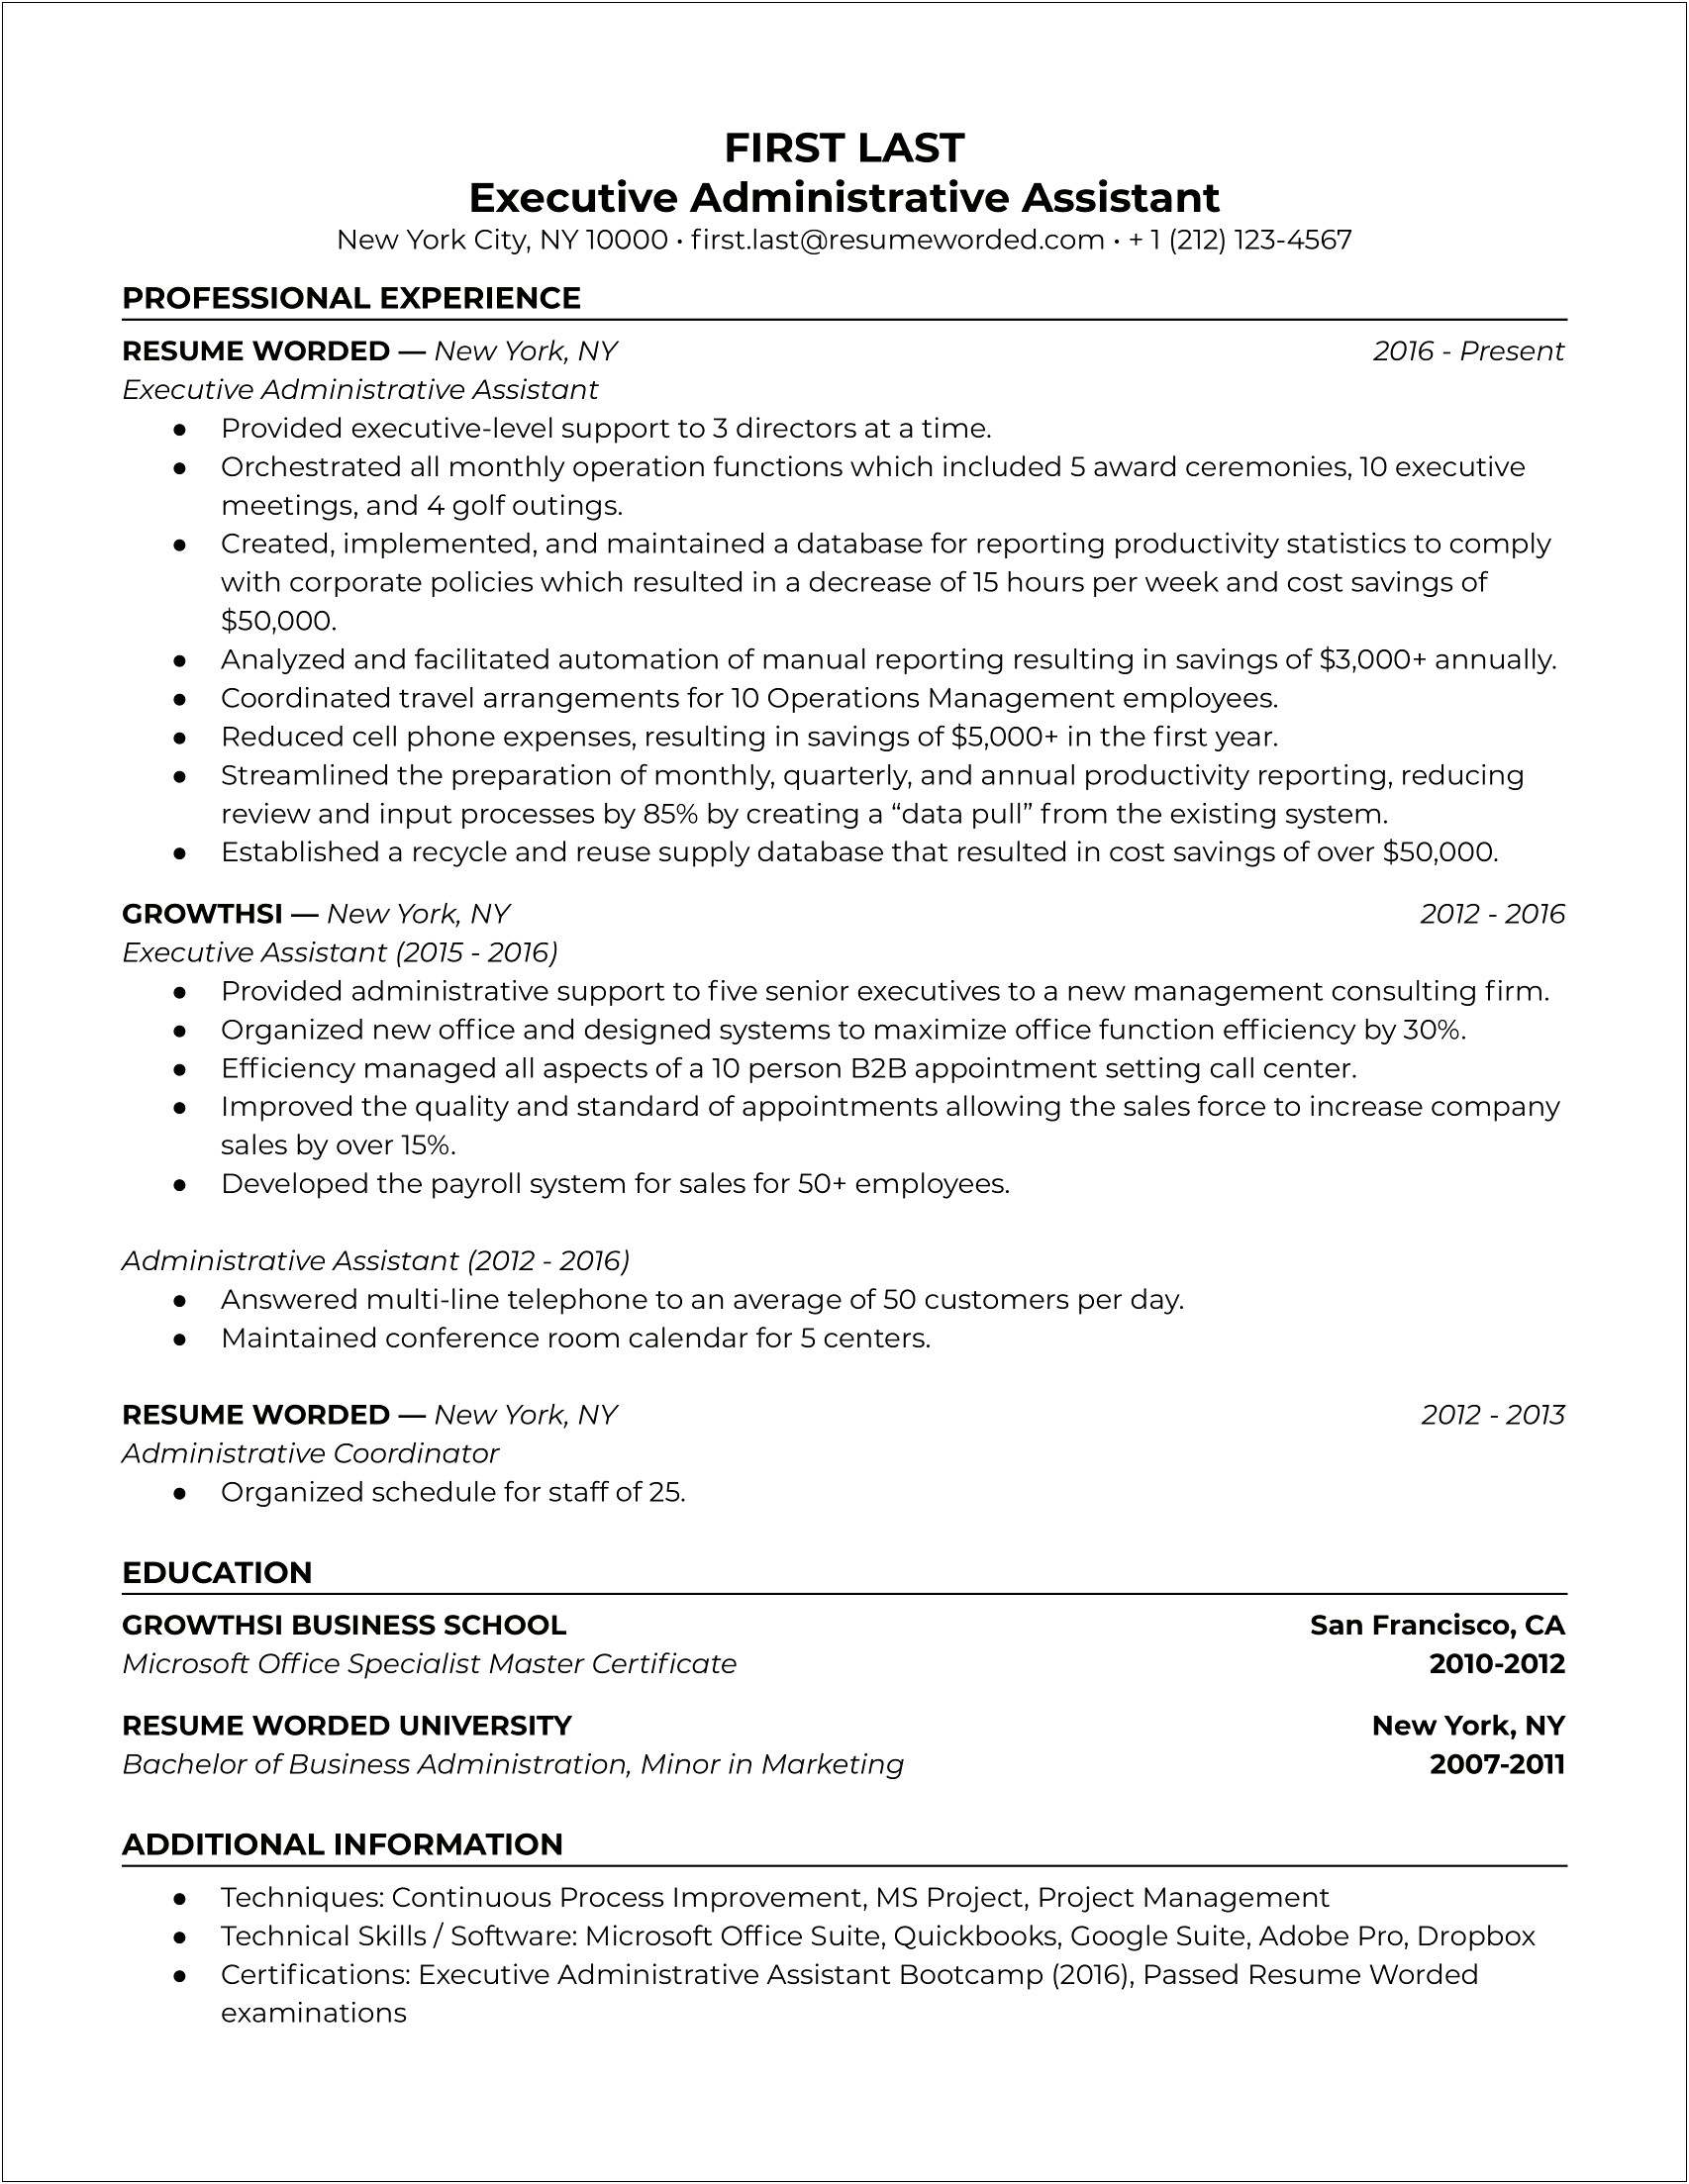 Key Skills In Resume For Executive Assistant